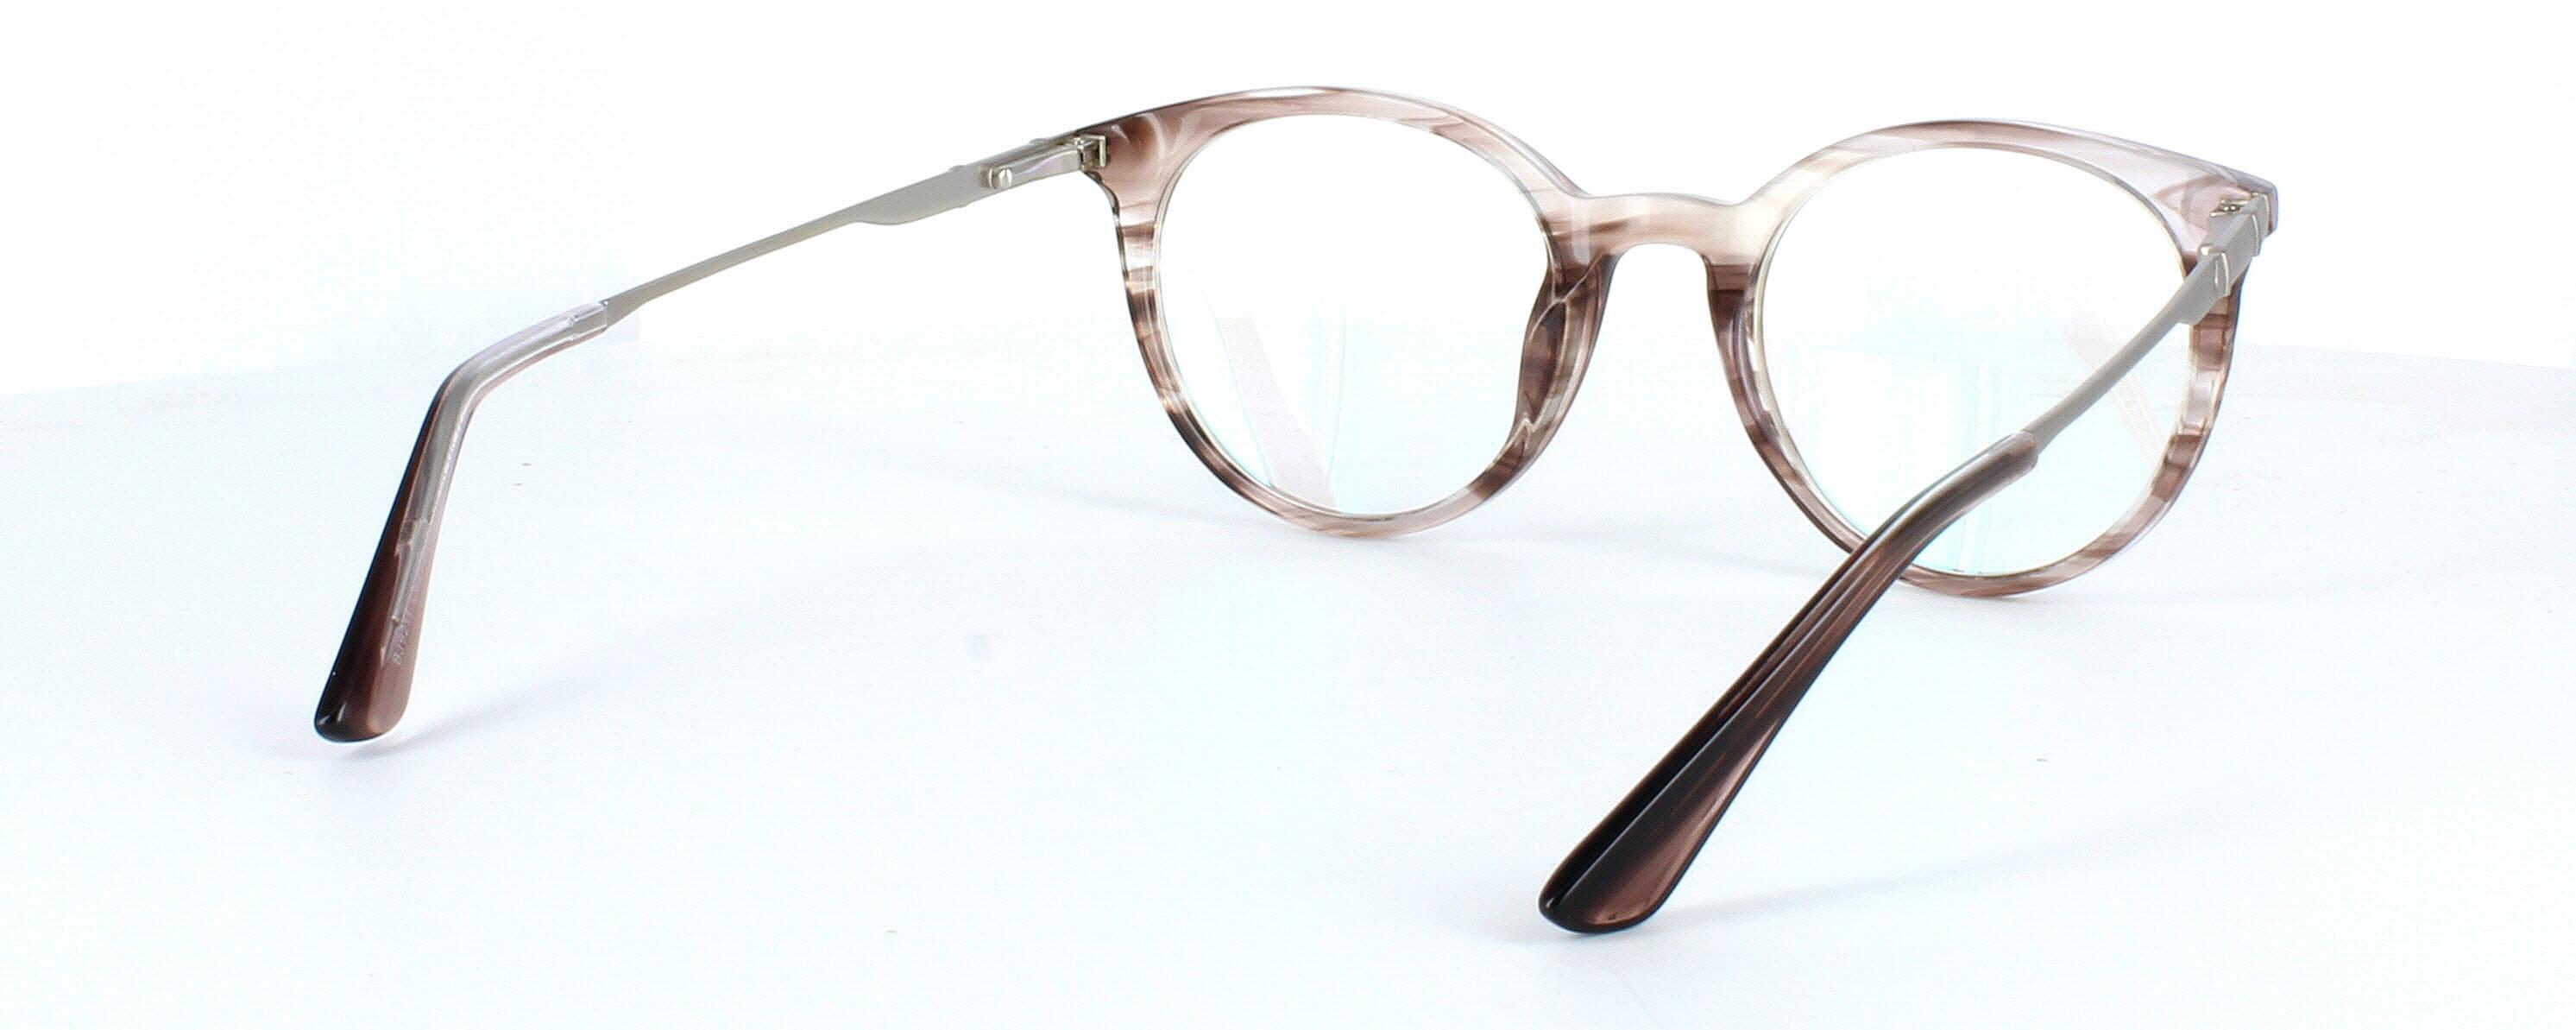 Edward Scotts BJ9211 - Brown -  Women's round shaped acetate with gold metal arms that are sprung hinged at the temples - image view 5